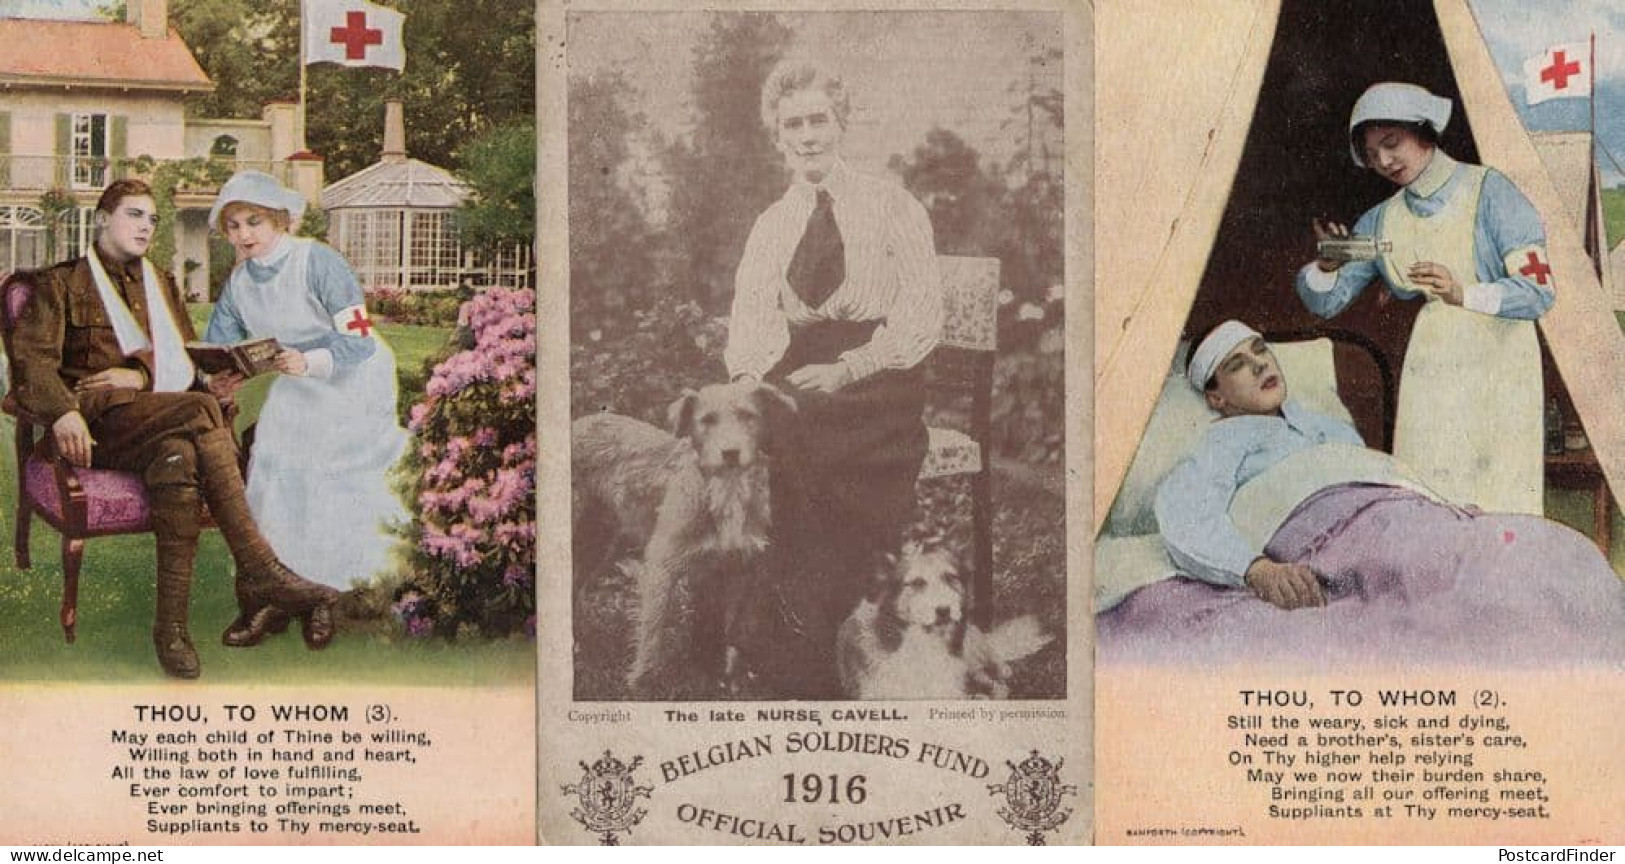 Belgian Belgium Soliders Fund Official 1916 Souvenir Edith Cavell Postcard & More - Red Cross